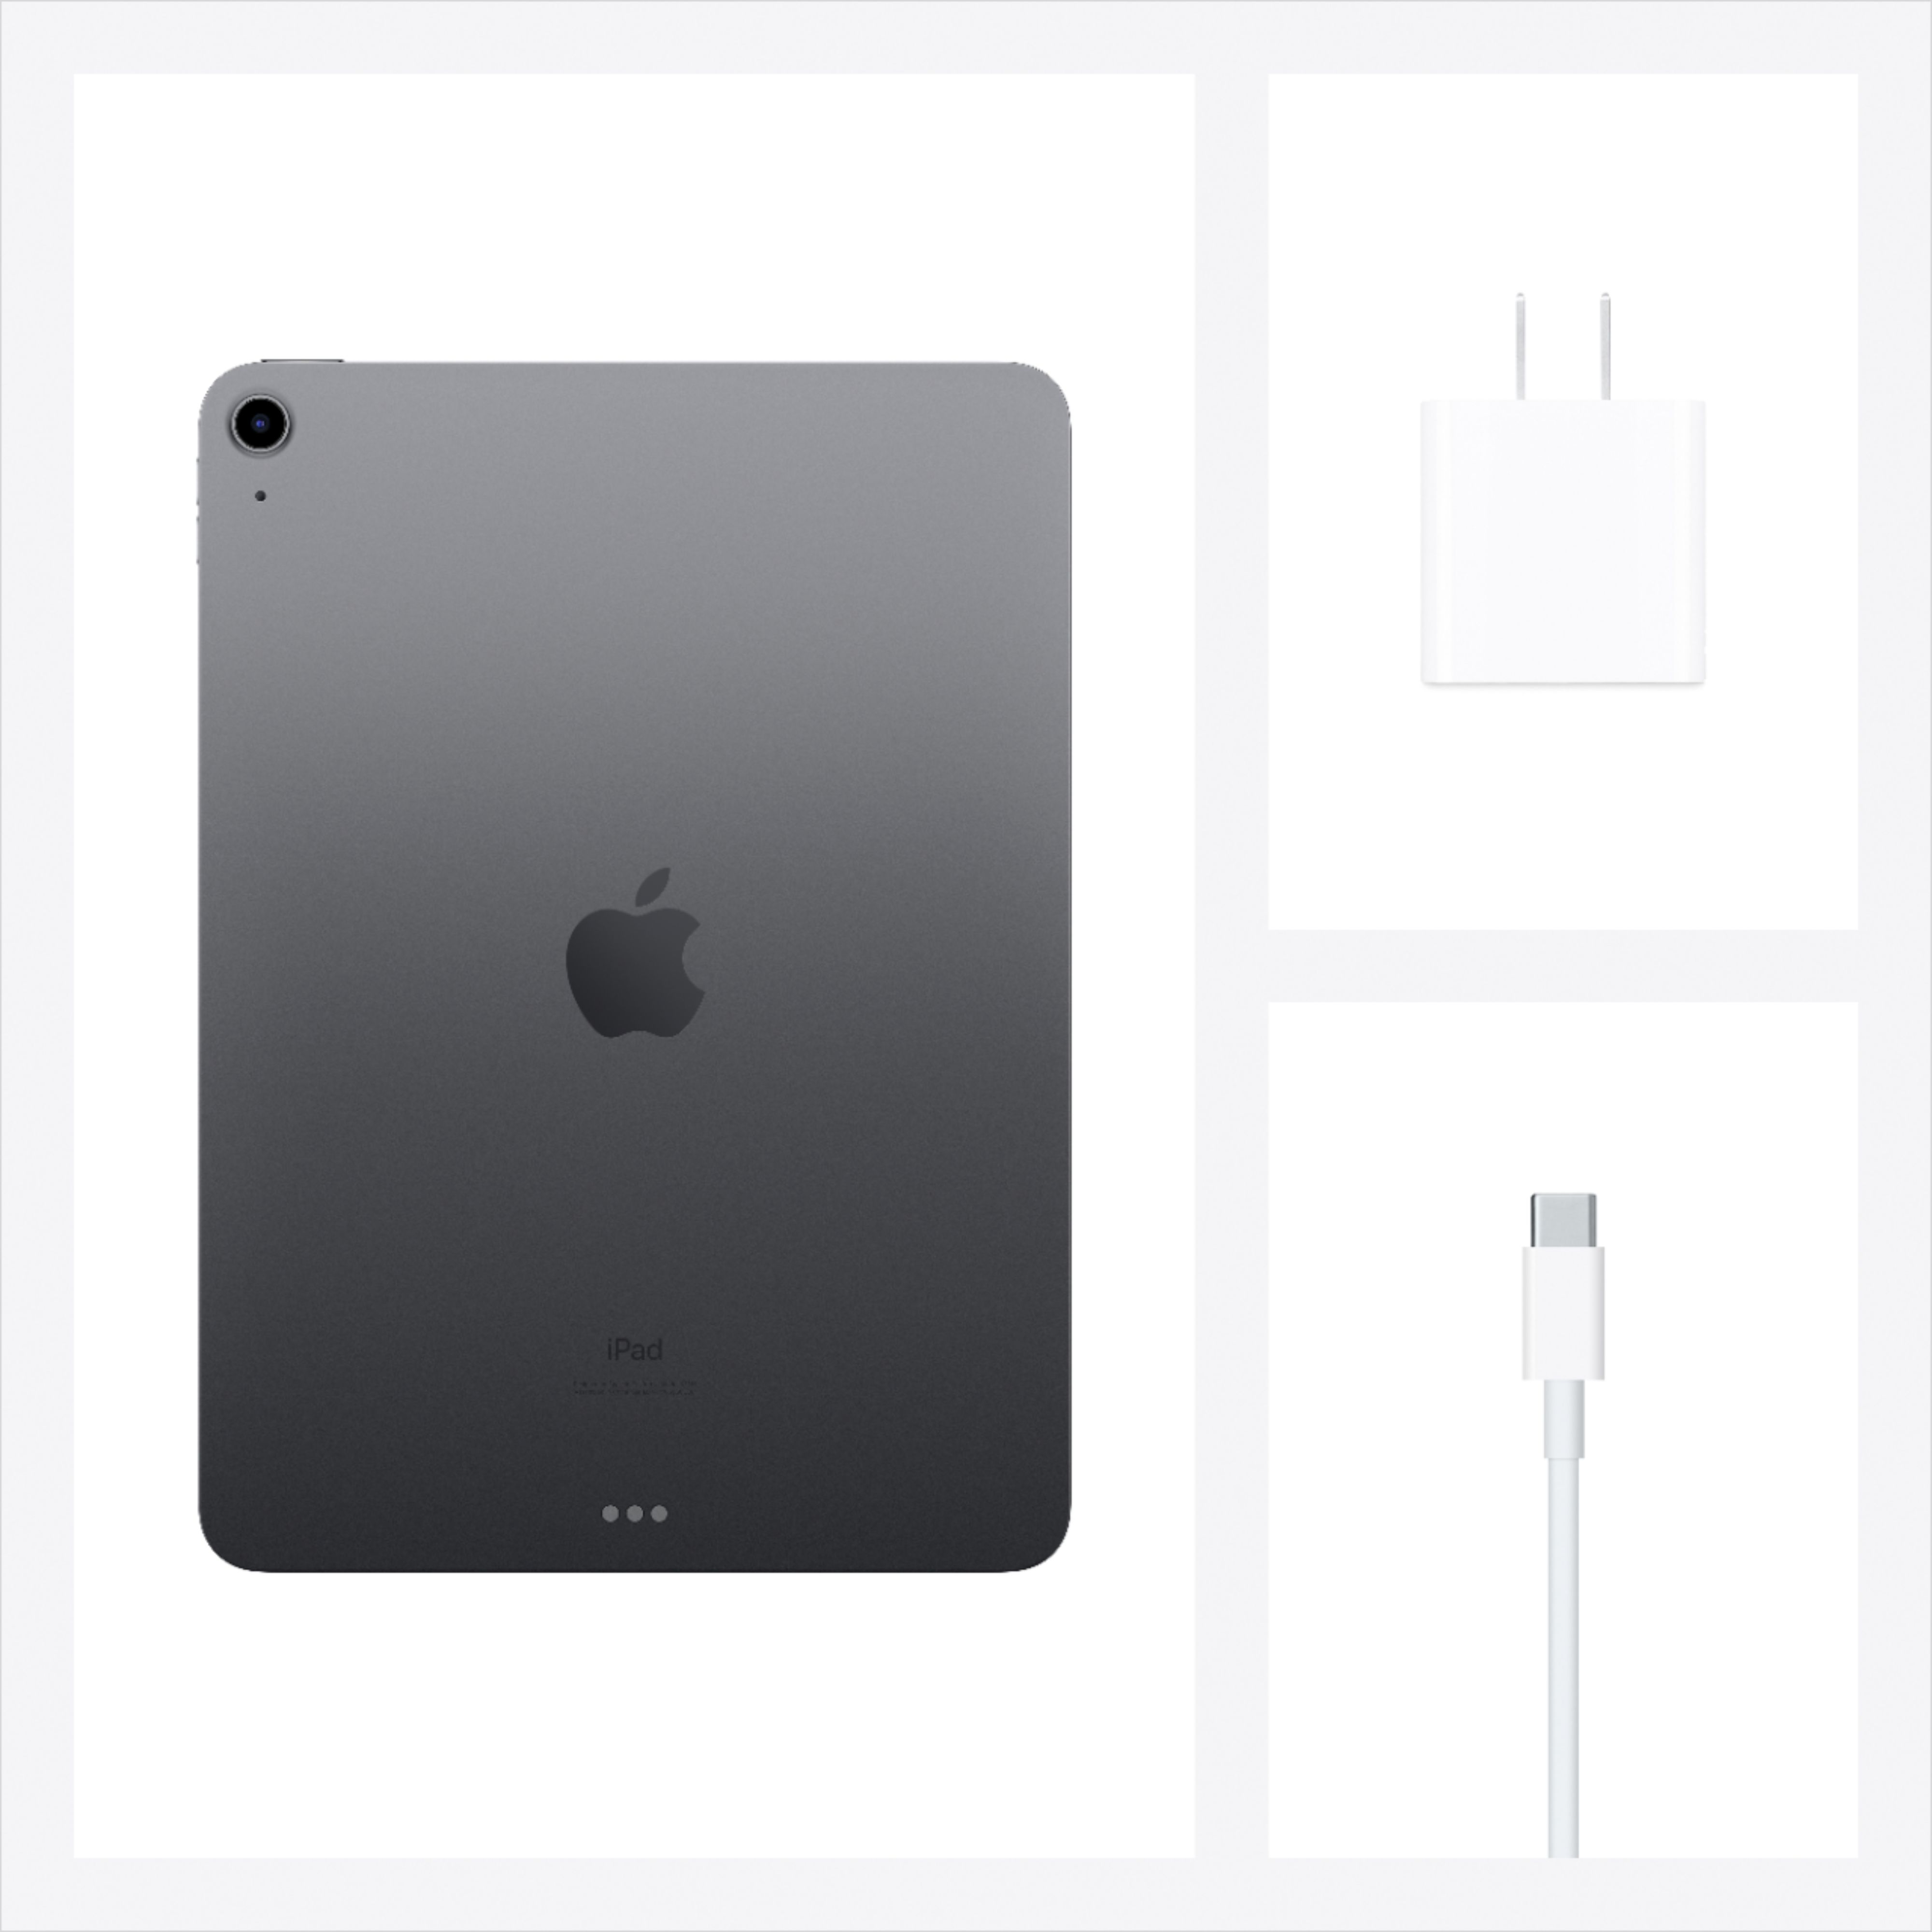 Apple - iPad Air (Latest Model) with Wi-Fi - 64GB - Space Gray